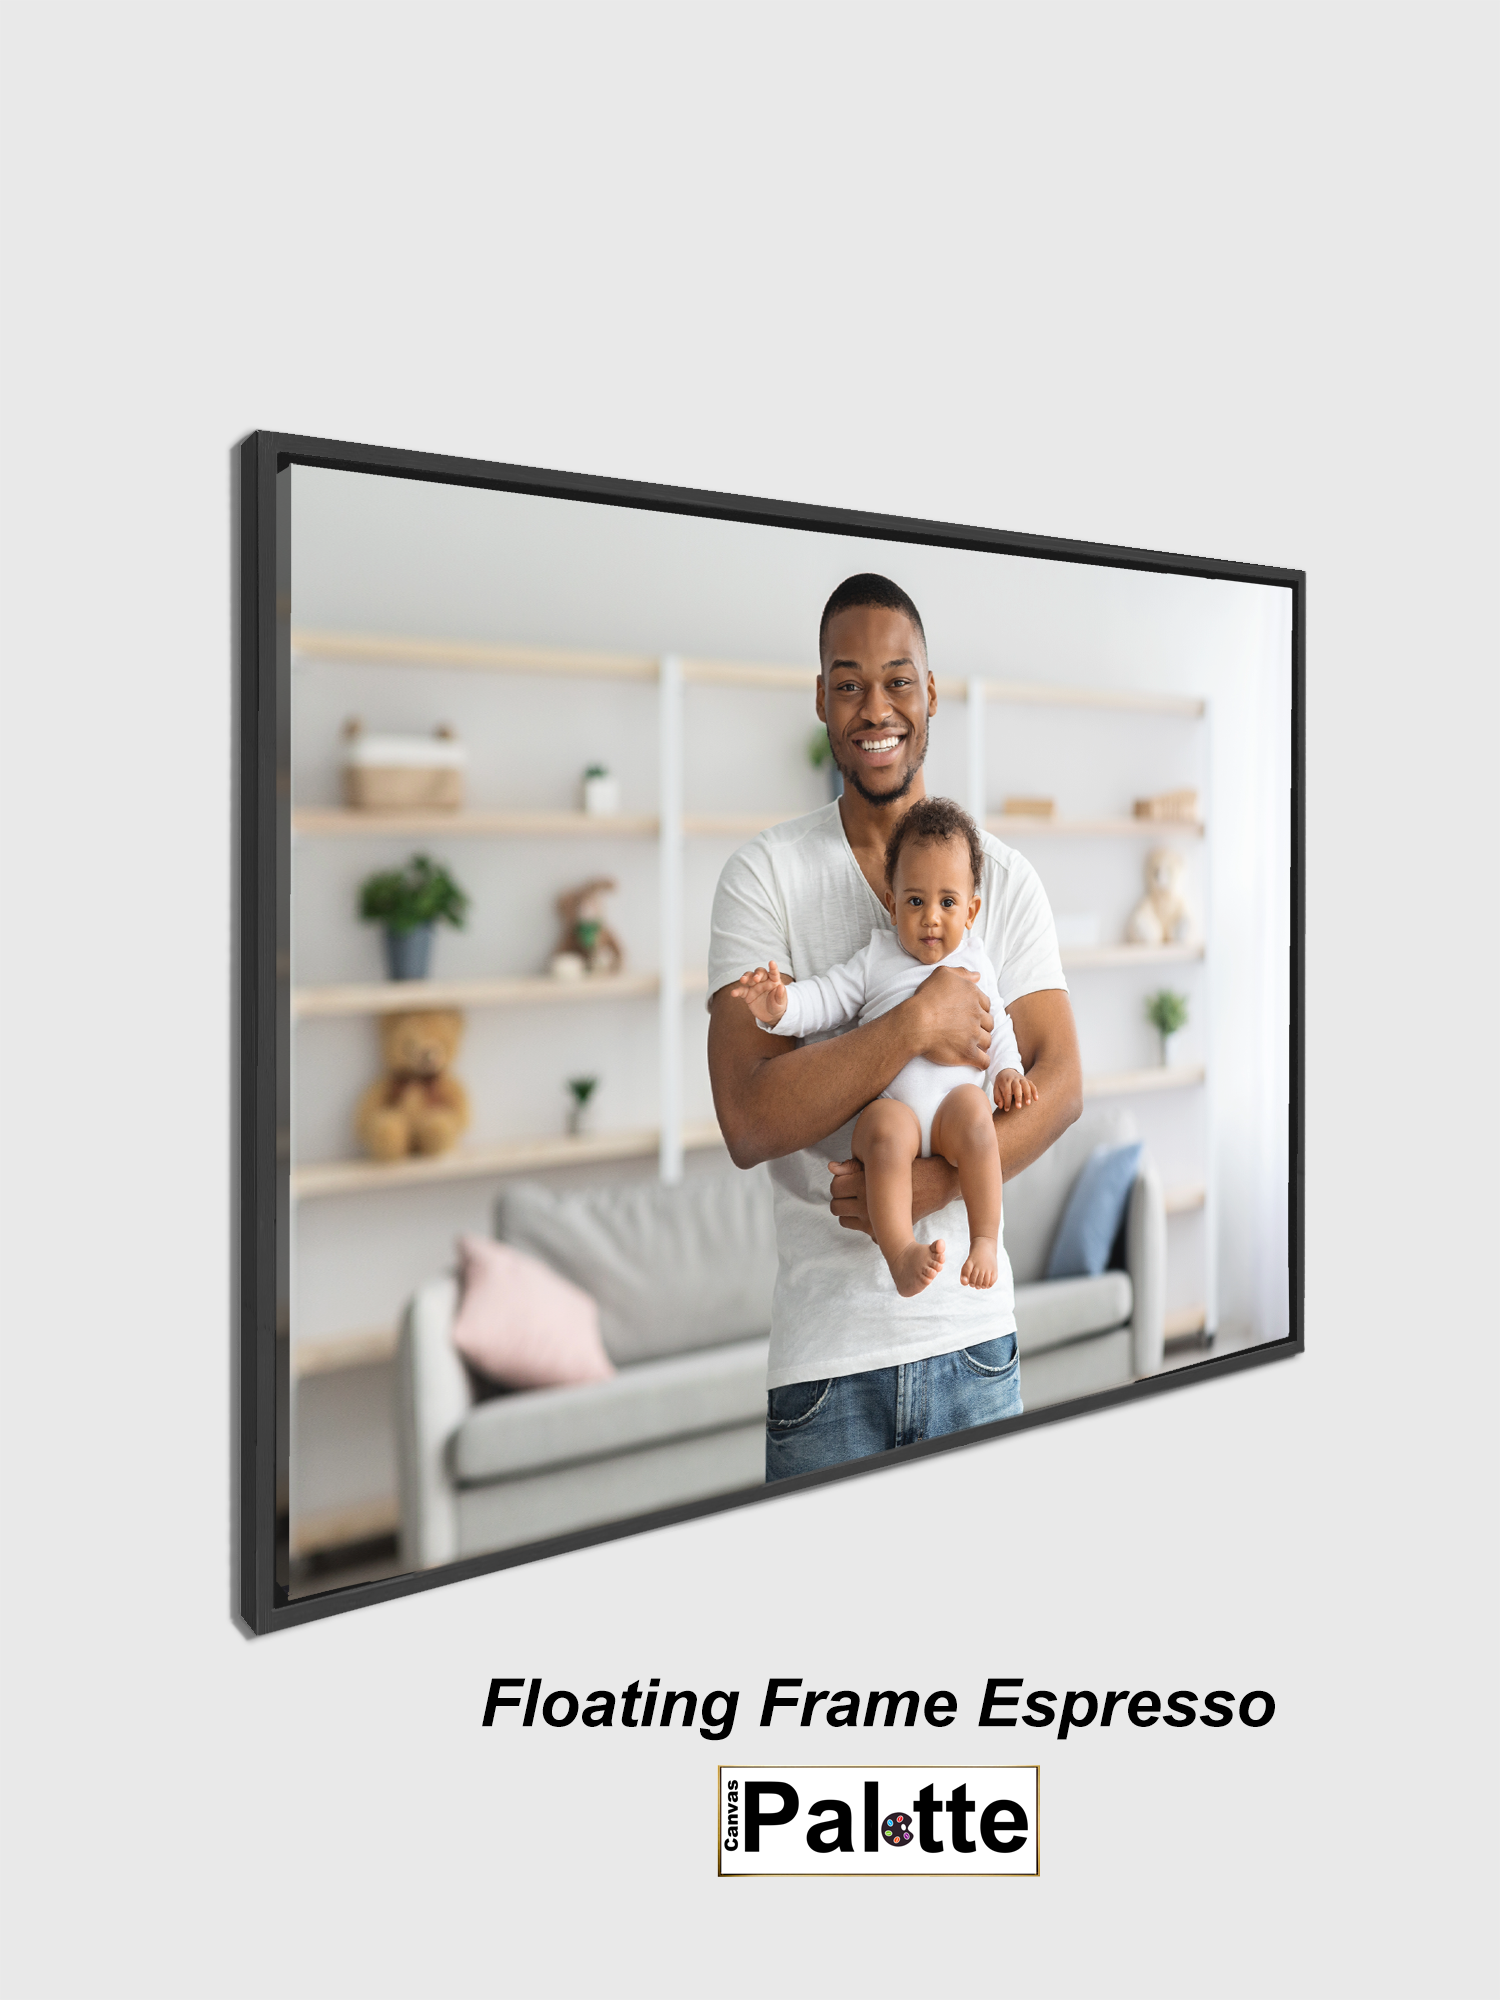 Canvas Palette example of a Espresso floating side frame for canvas framing a portrait of father and his baby.